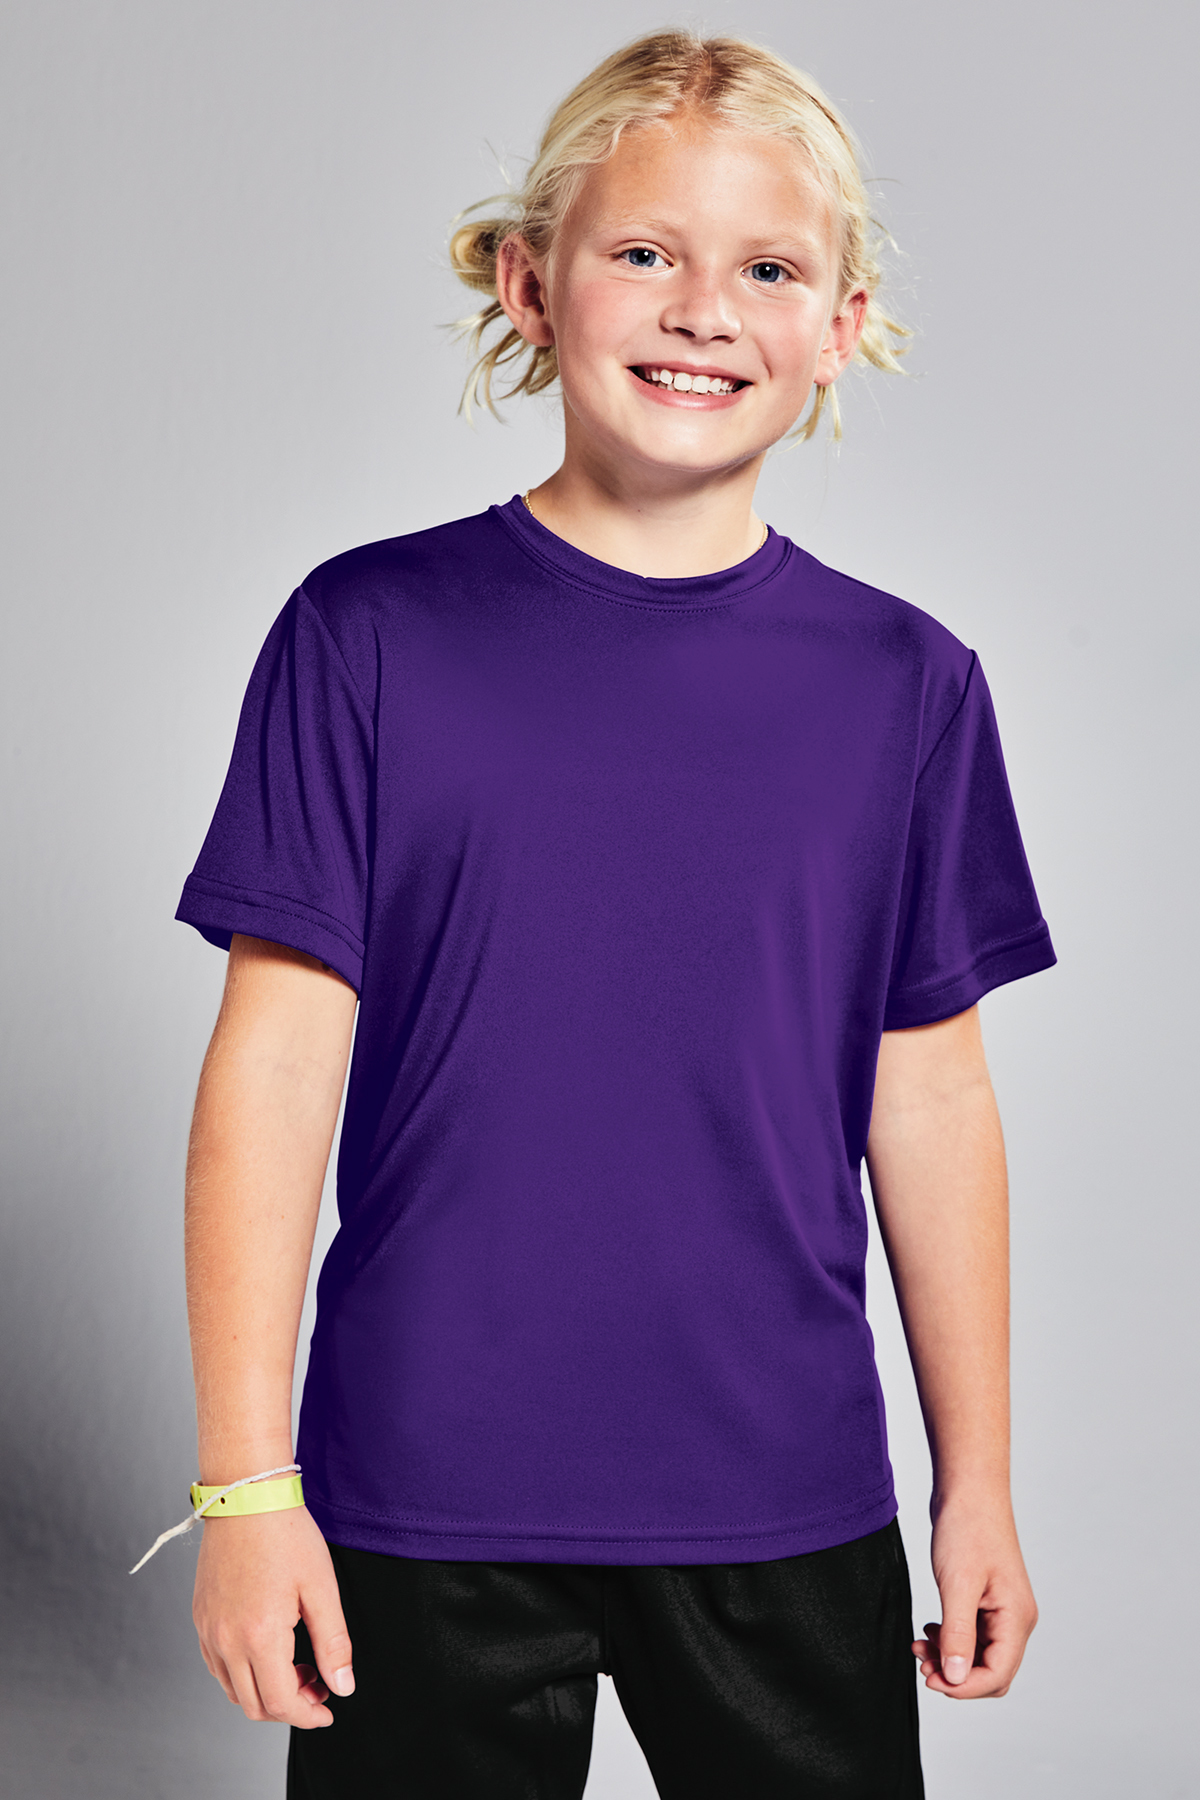 Sport-Tek Youth PosiCharge Competitor™ Tee | Product | Sport-Tek